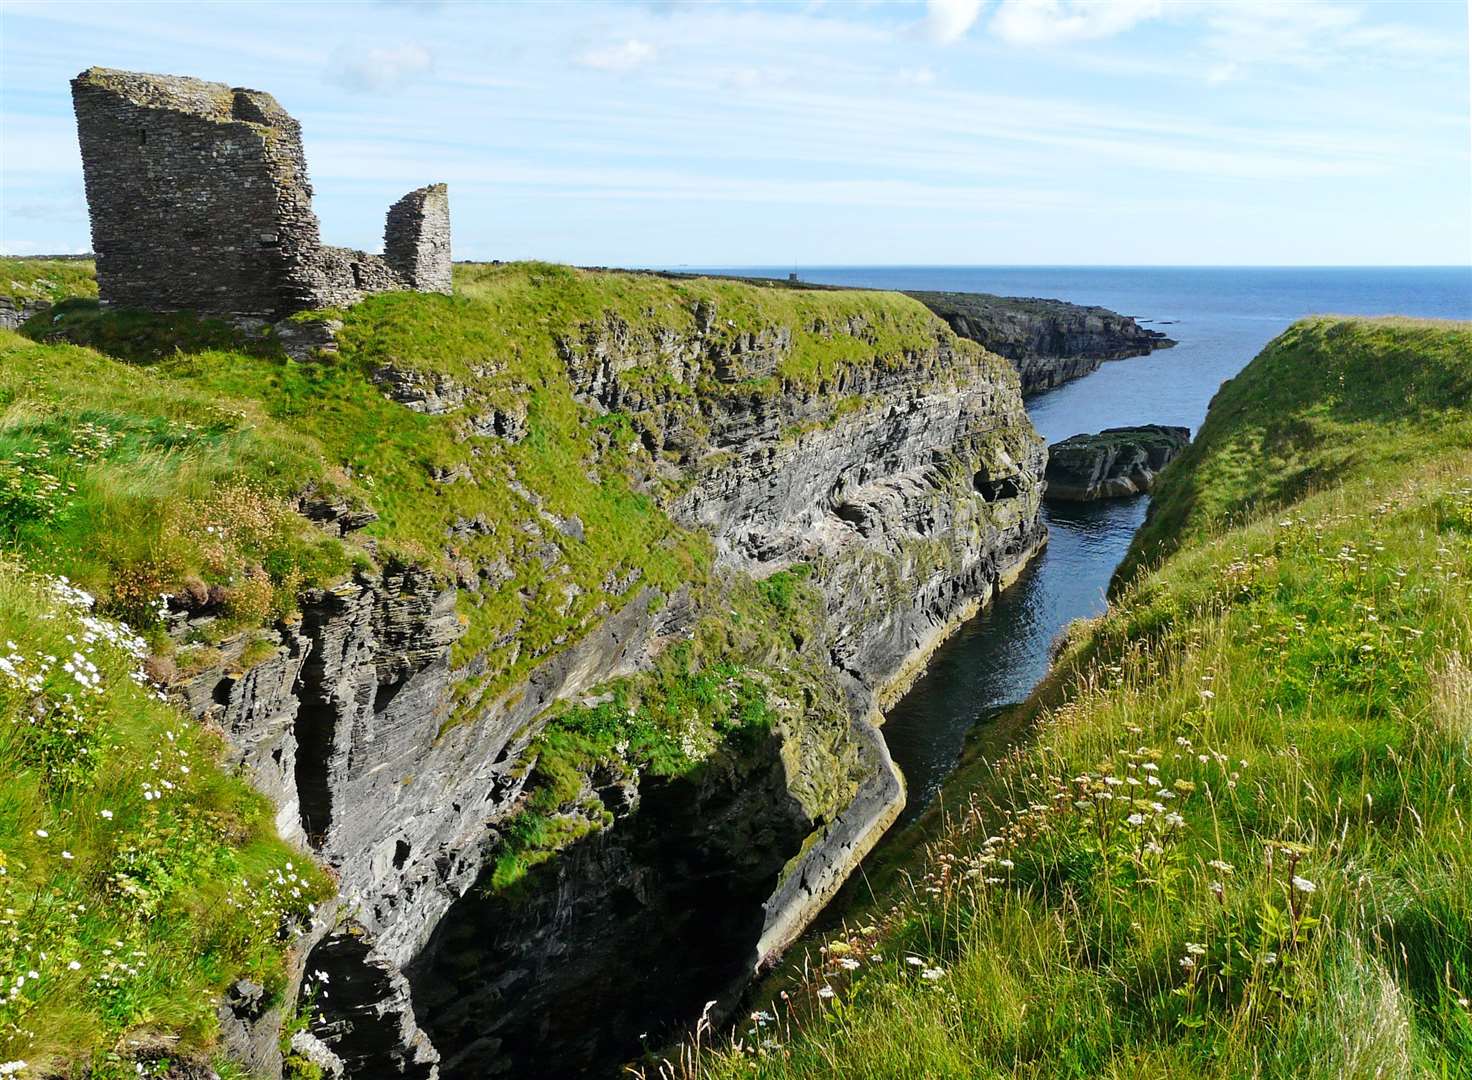 The Castle of Old Wick sits on a narrow promontory to the south of the town. Picture: Alan Hendry